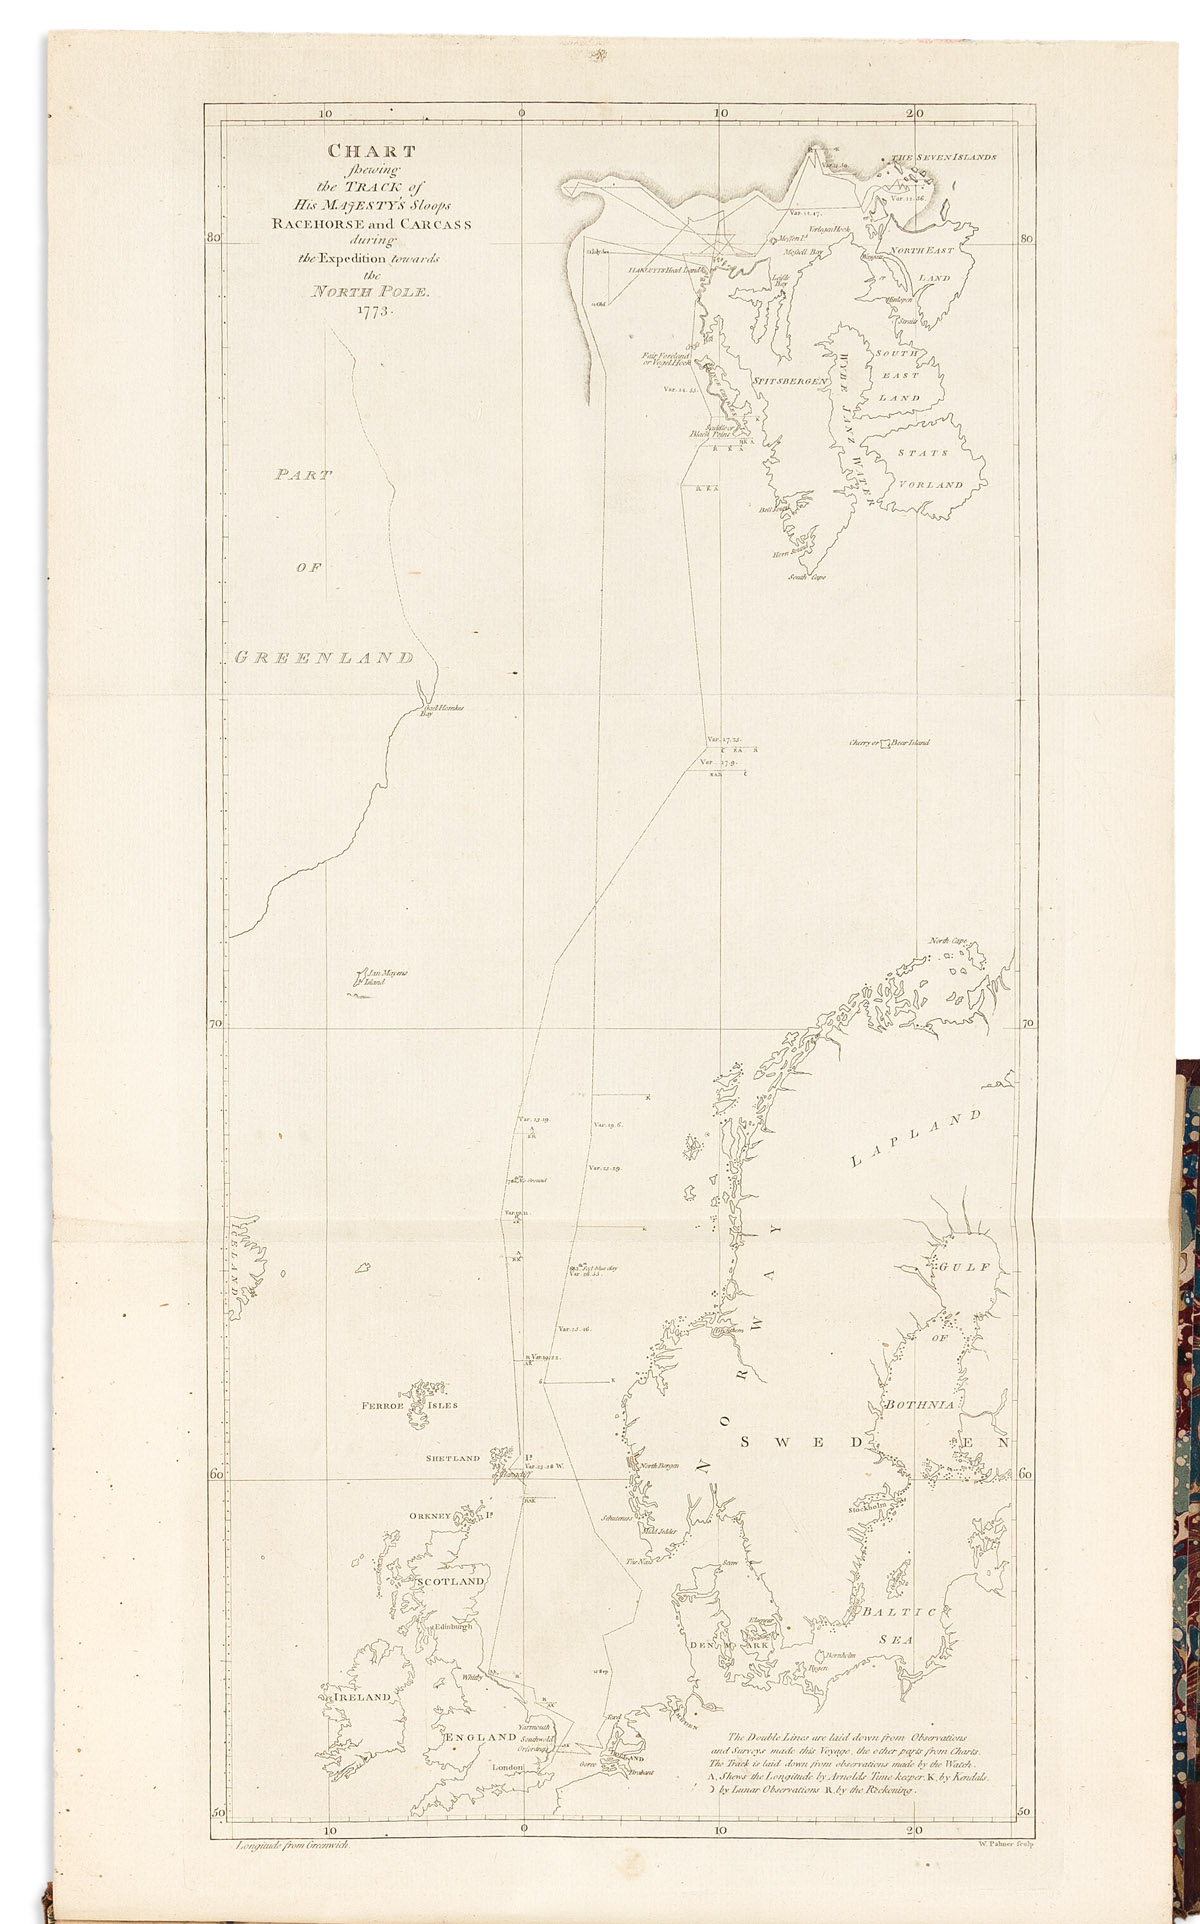 (ARCTIC EXPLORATION.) Constantine John Phipps. A Voyage Towards the North Pole Undertaken by His Majestys Command 1773.